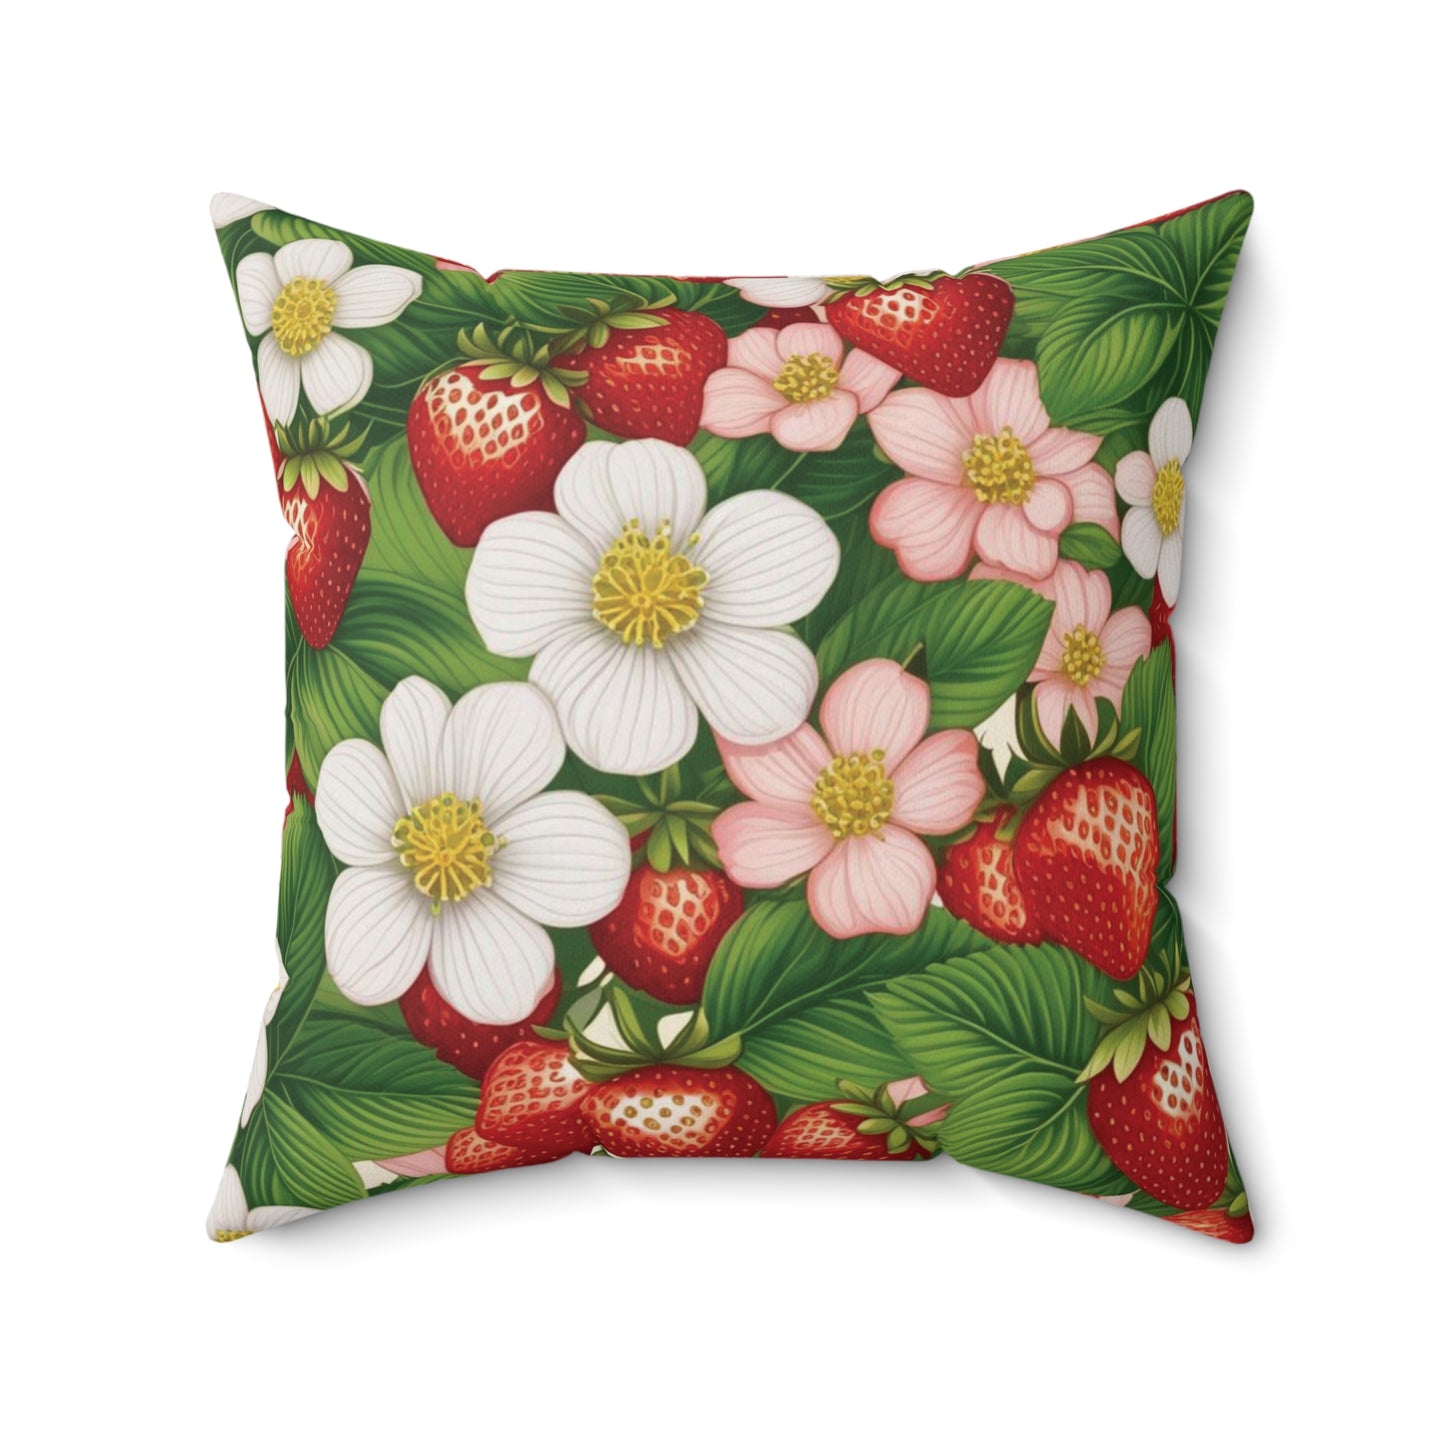 Strawberry Dreams Design on Both Sides of Spun Polyester Square Pillow